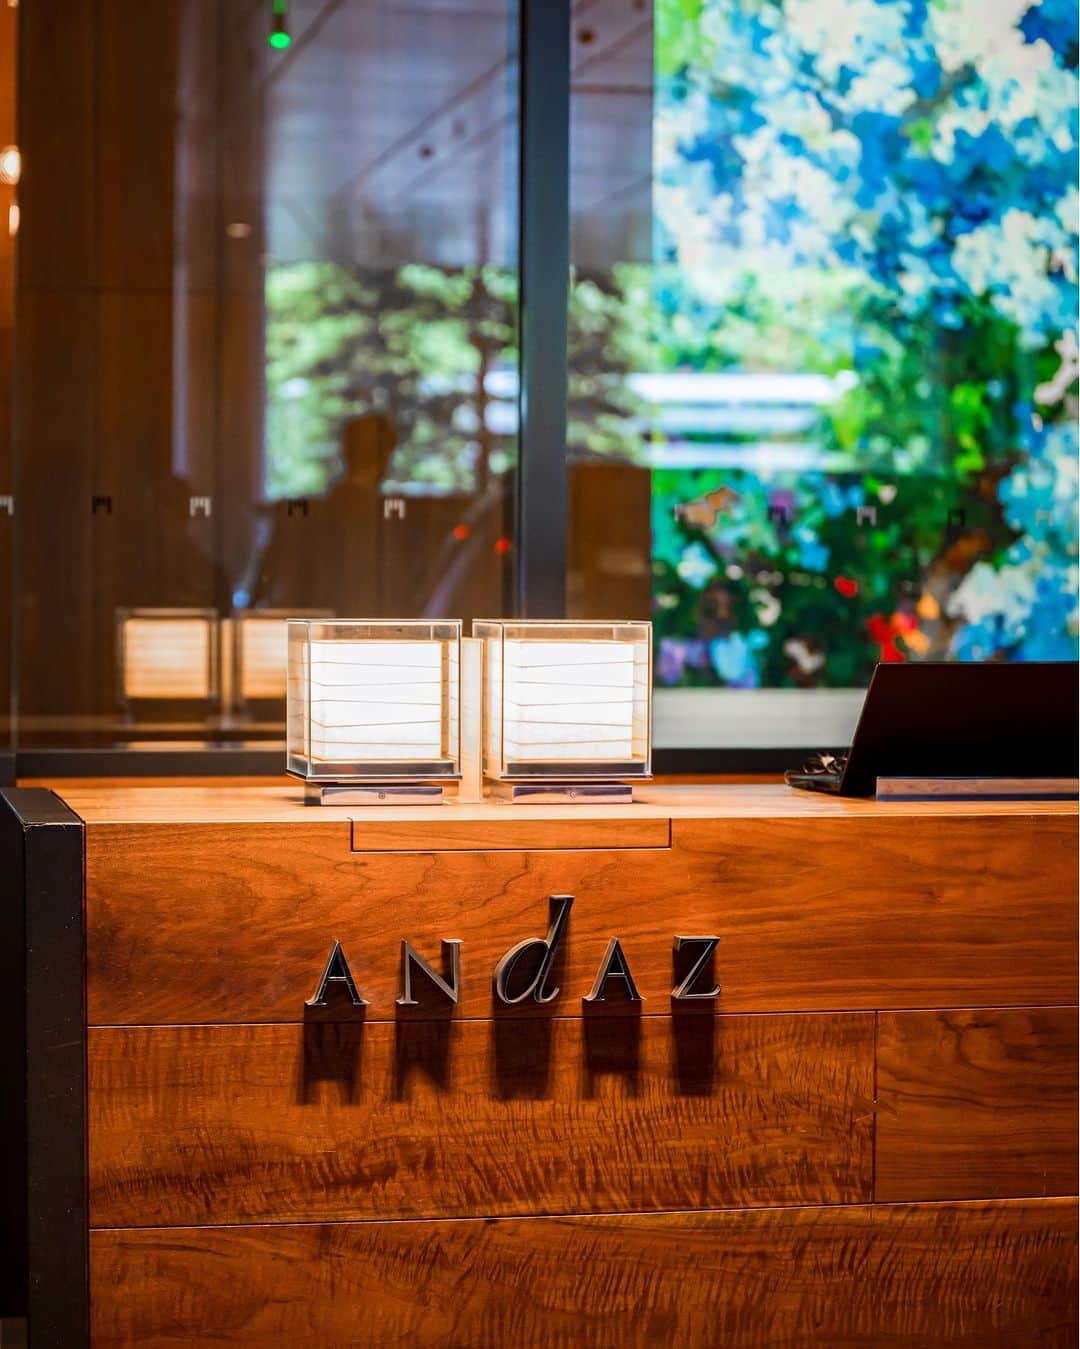 Andaz Tokyo アンダーズ 東京のインスタグラム：「日本家屋のぬくもりをモダンなテイストで。アンダーズ 東京では、客室や館内のパブリックエリアで和紙のランプを採用しています。和紙を通して伝わる暖かい光に、まるでご自宅に帰ってきたかのような安らぎを感じると大変ご好評をいただいています。  Feel the warmth of a Japanese house with a contemporary and modern touch. The light diffused by the lanterns, made with Japanese ‘washi’ paper, scattered throughout the public spaces and inside the guest rooms create a relaxing ambiance as if you were returning to your home.    #駅直結 #東京ホテル #beautifulhotels #tokyohotel #toranomon #luxuryhotel #ホテルステイ #ホテル好き #ライフスタイルホテル #ラグジュアリーホテル #虎ノ門ヒルズ #toranomonhills #アンダーズ東京 #andaztokyo #トニーチー #TonyChi #tokyo #japan」